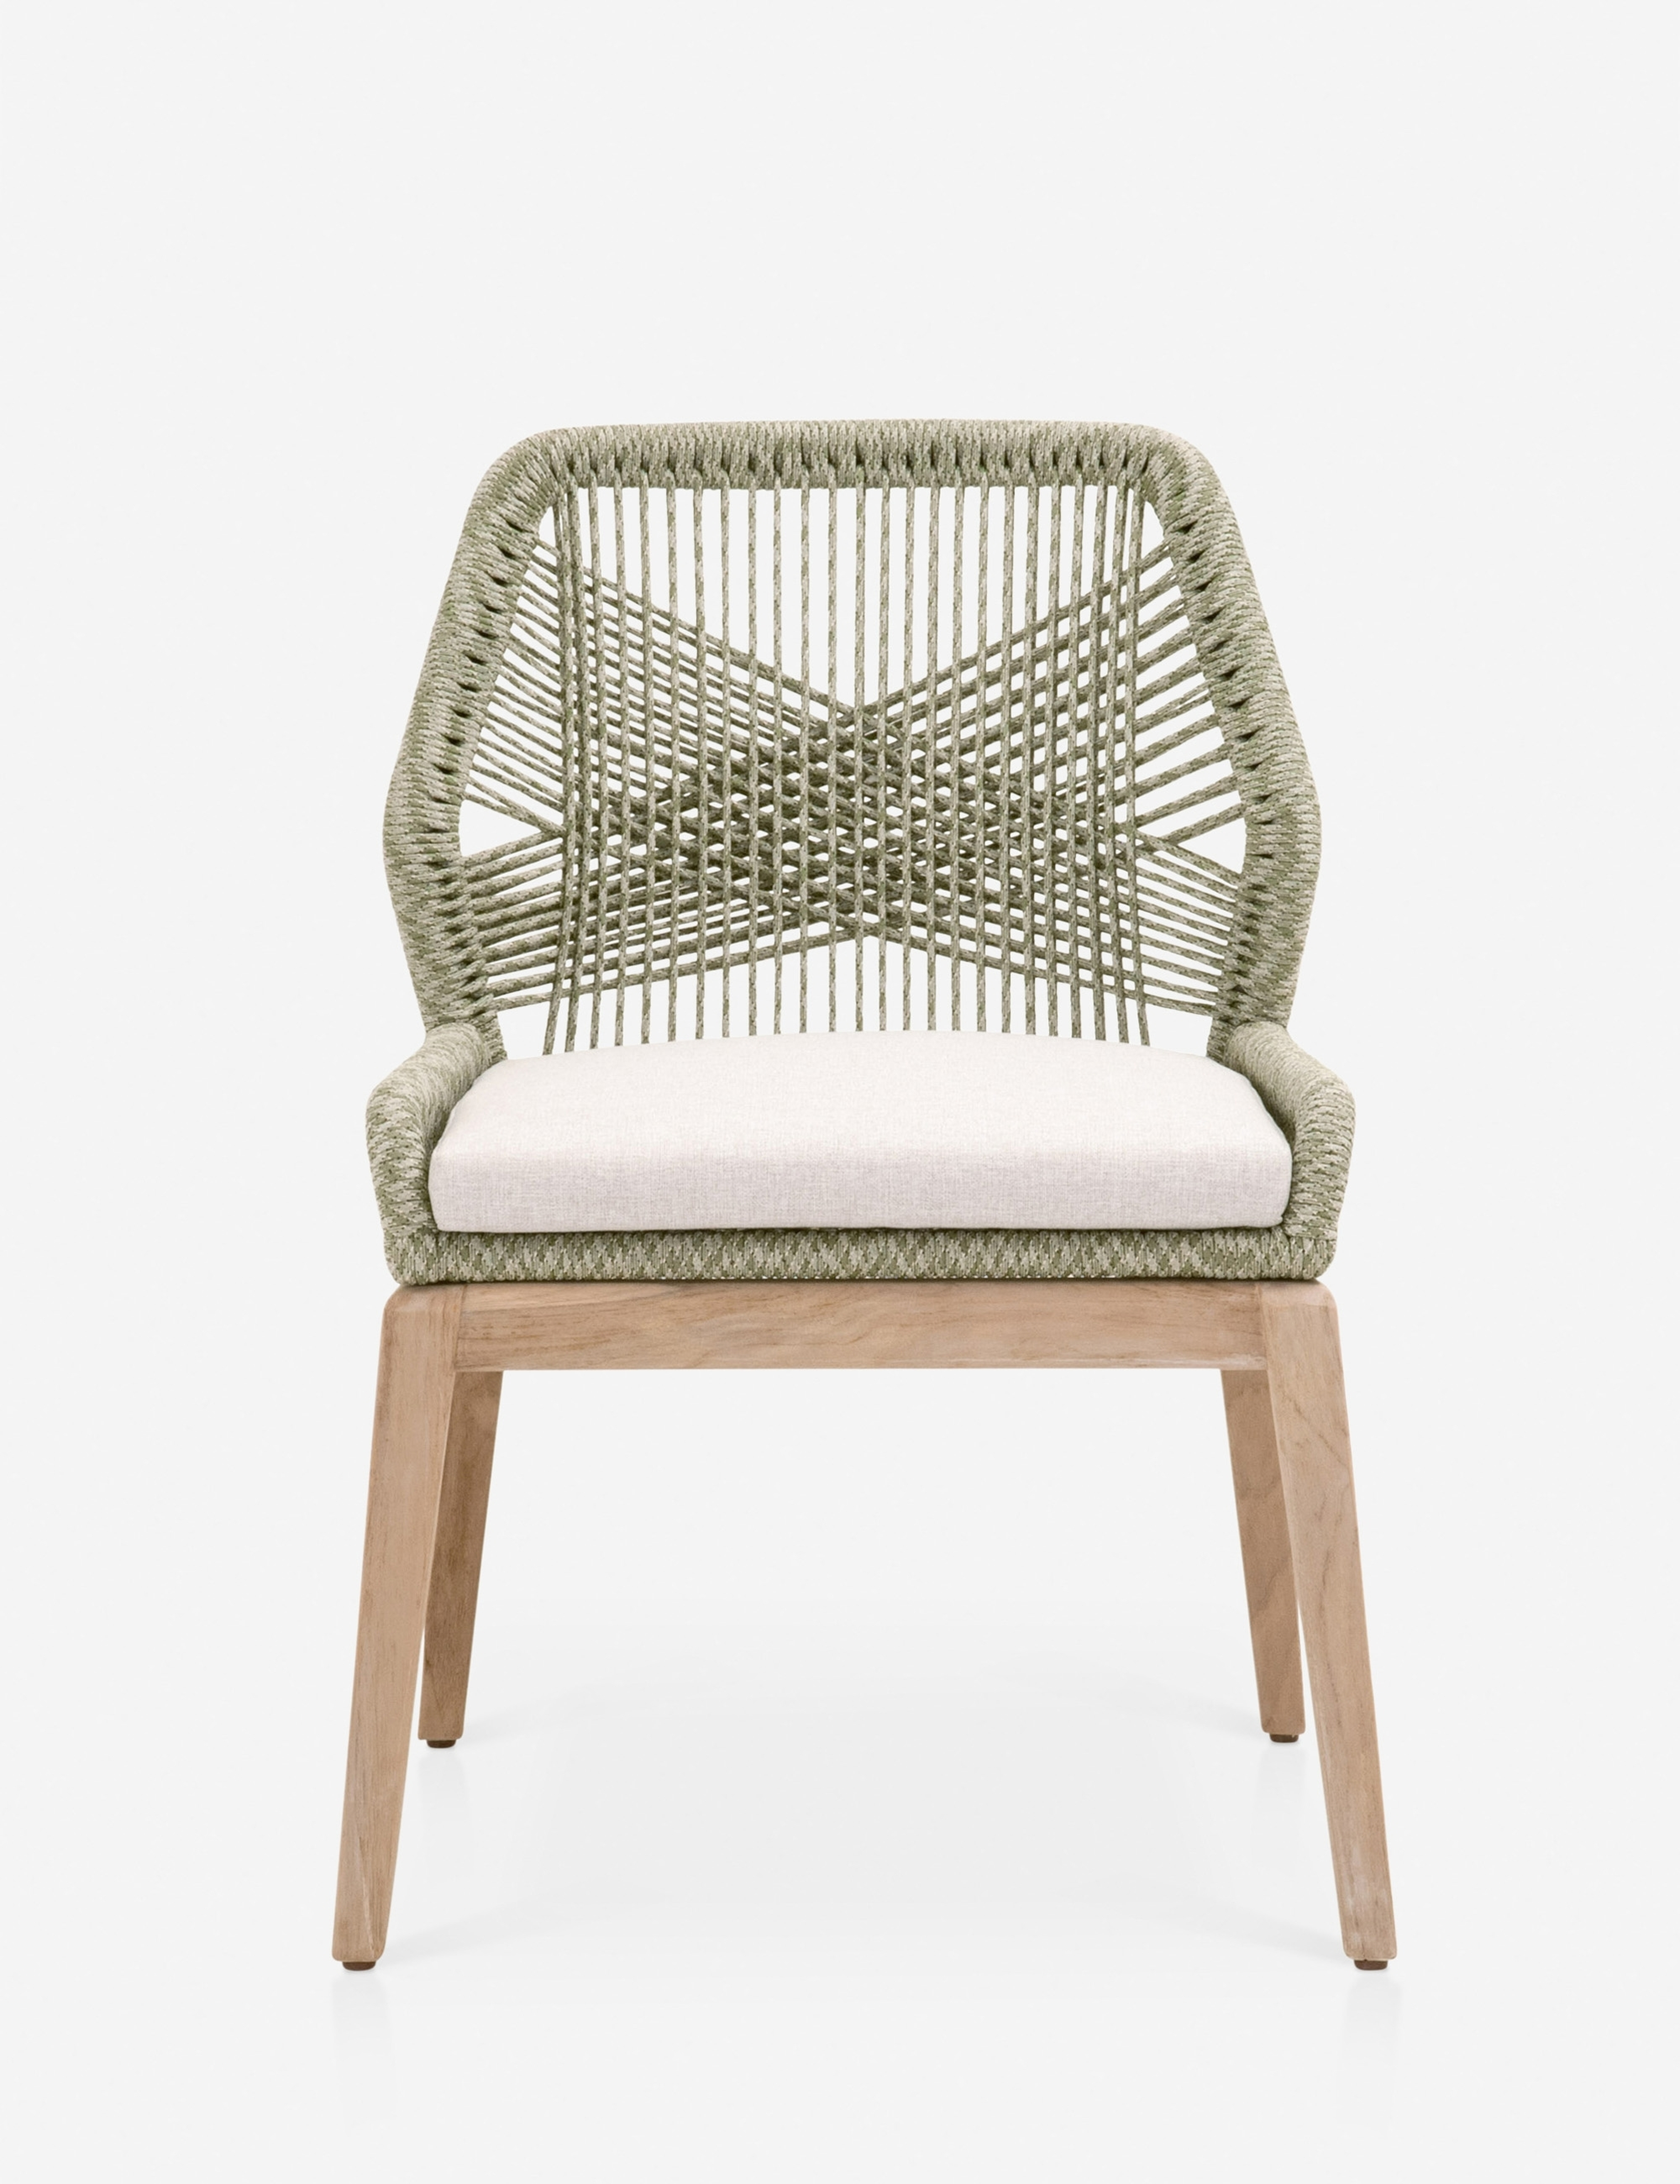 London Indoor / Outdoor Dining Chair, Moss (Set of 2) - Lulu and Georgia